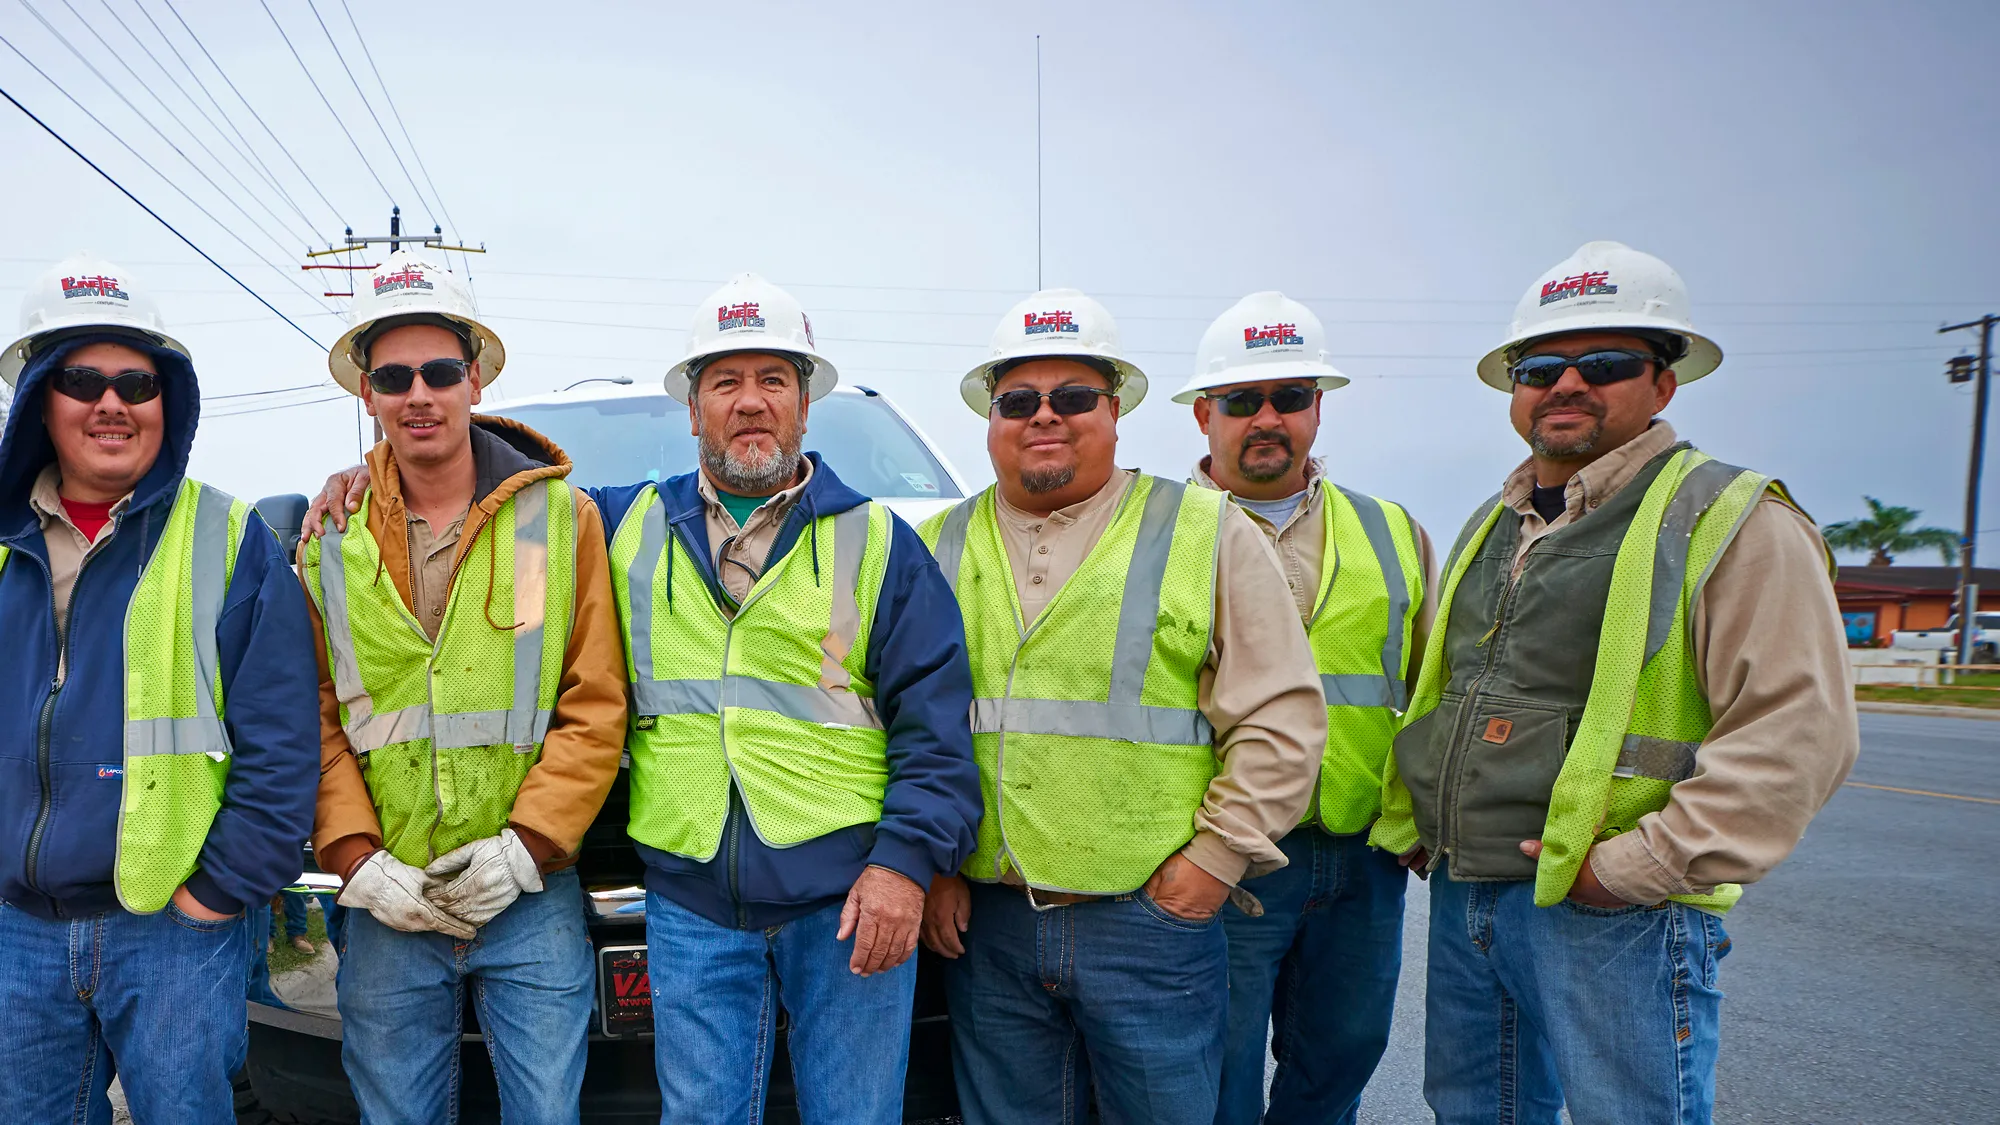 A team of Linetec workers in safety vests and hard hats smile together on a worksite in Harlingen, Texas.